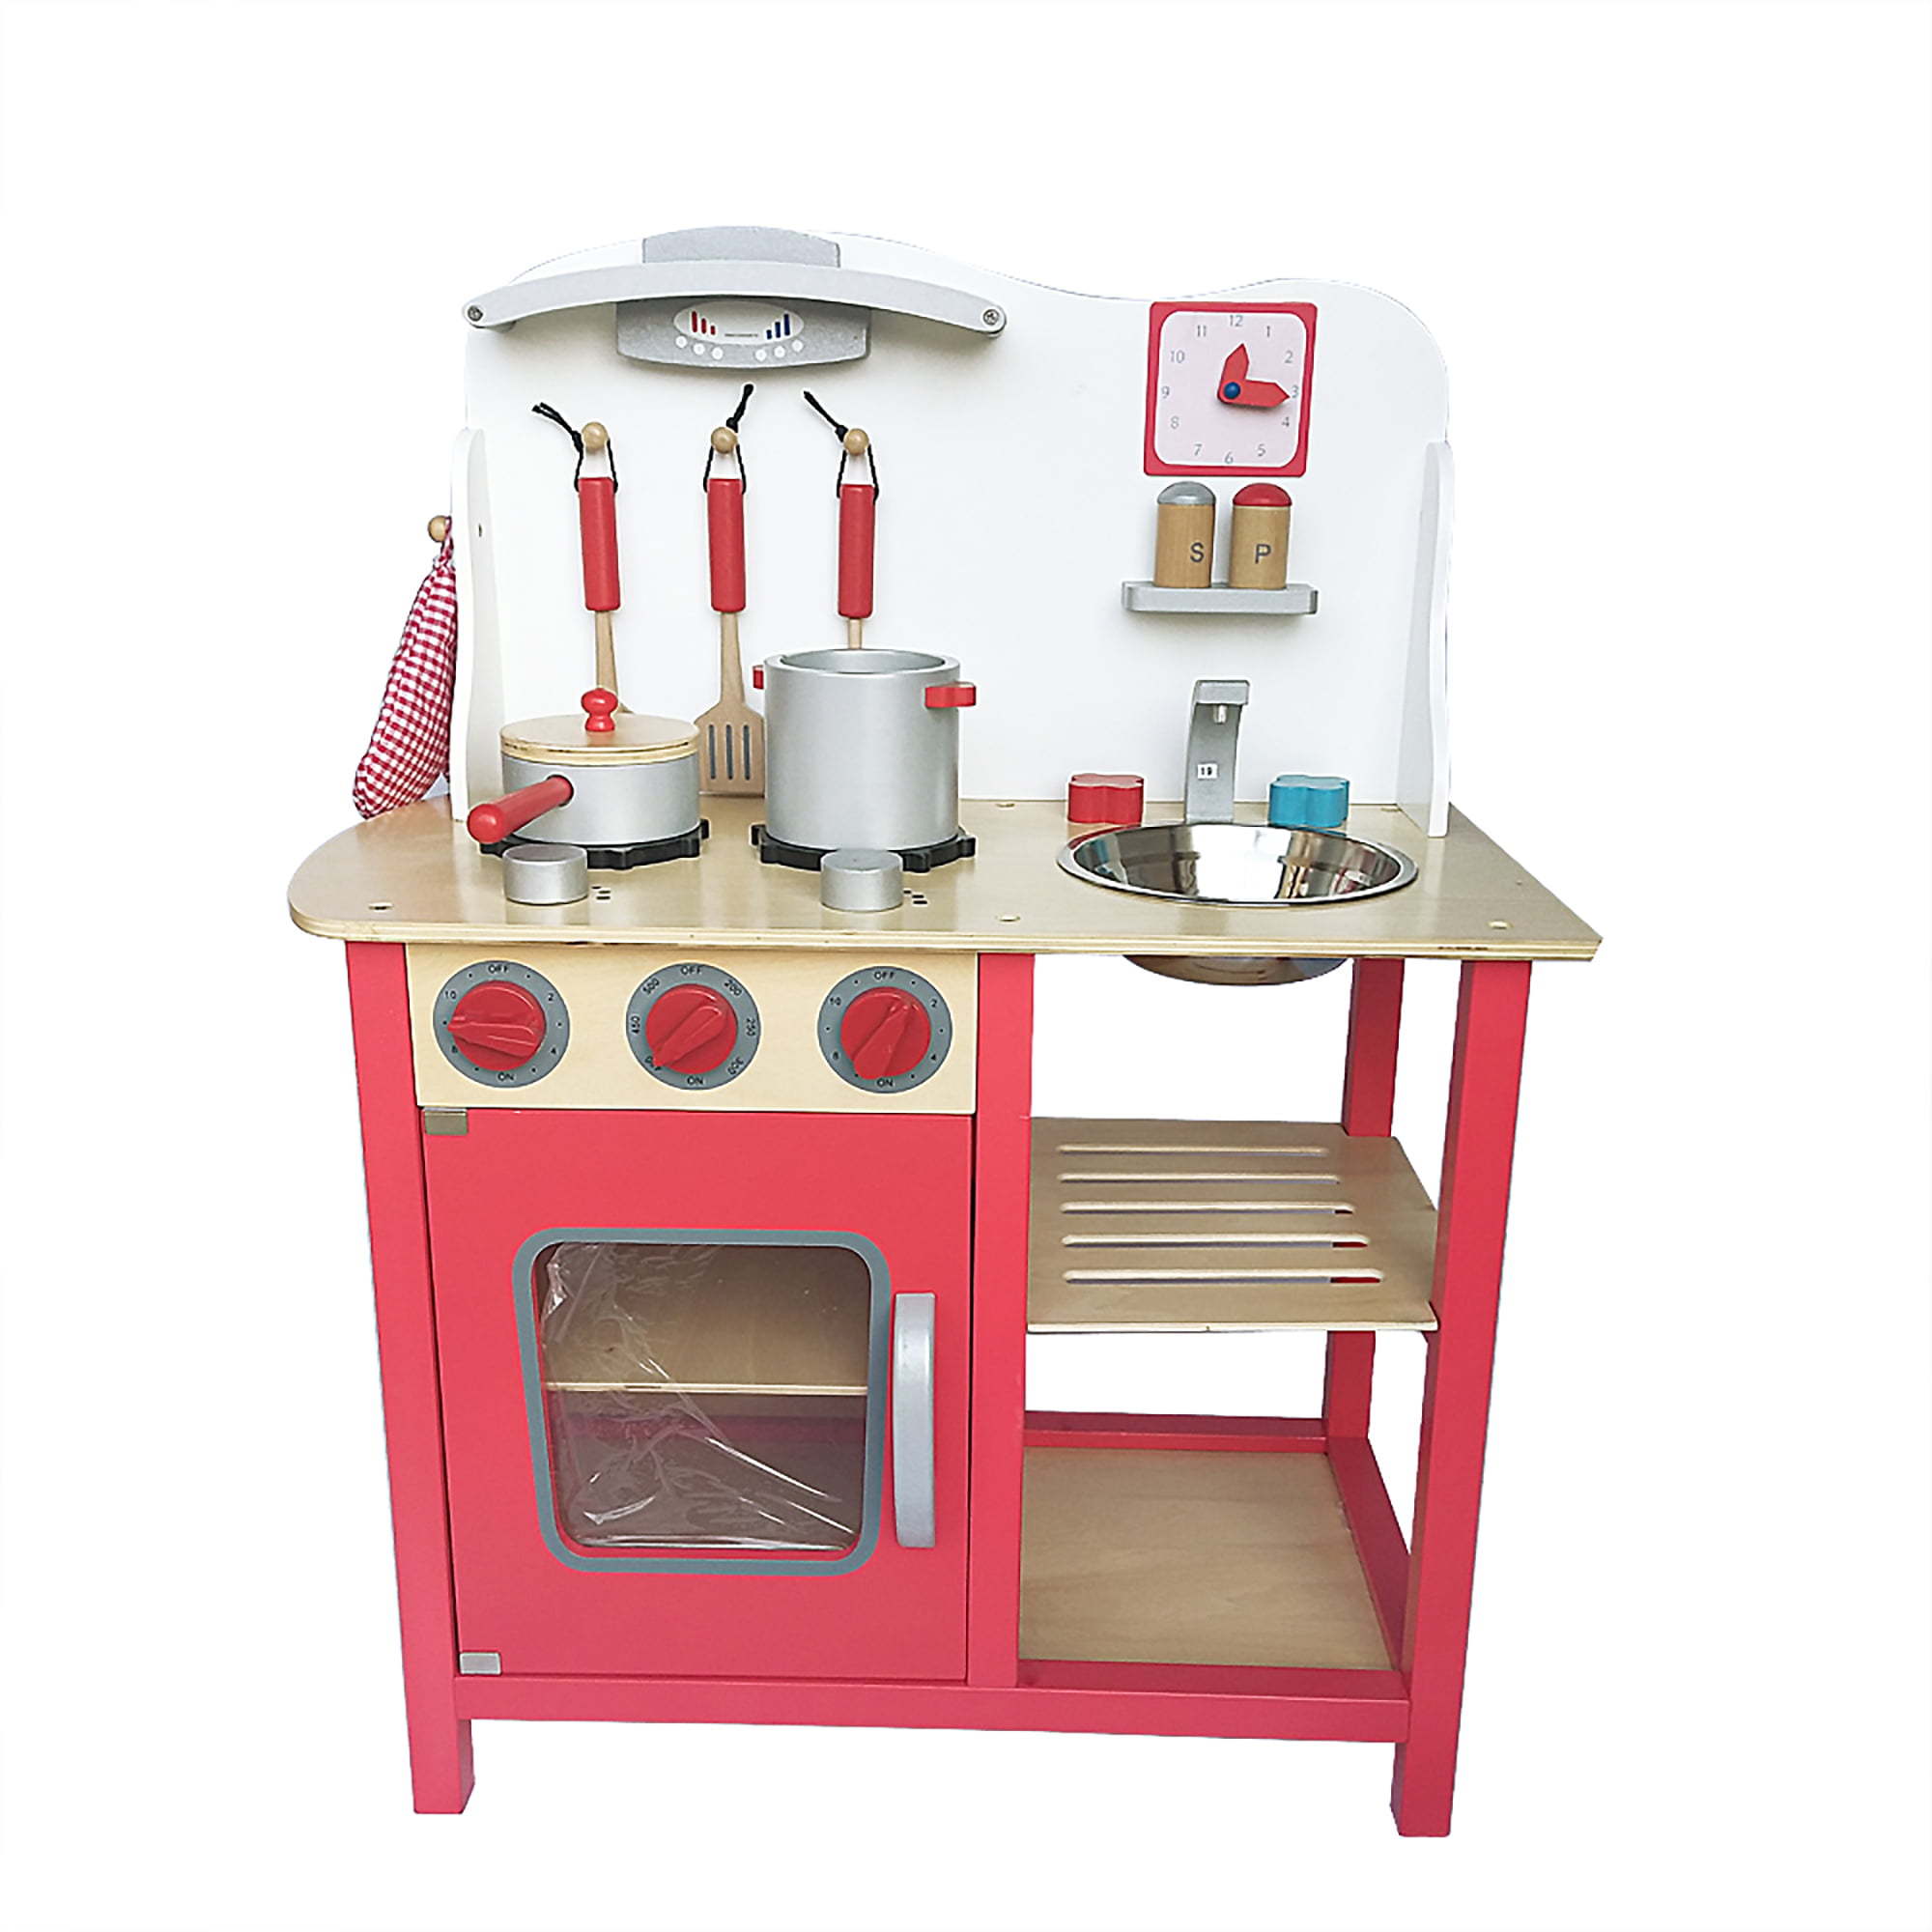 Kids Wood Kitchen Cooking Pretend Play Set Toy Baby Toddler Wooden Playset Gift